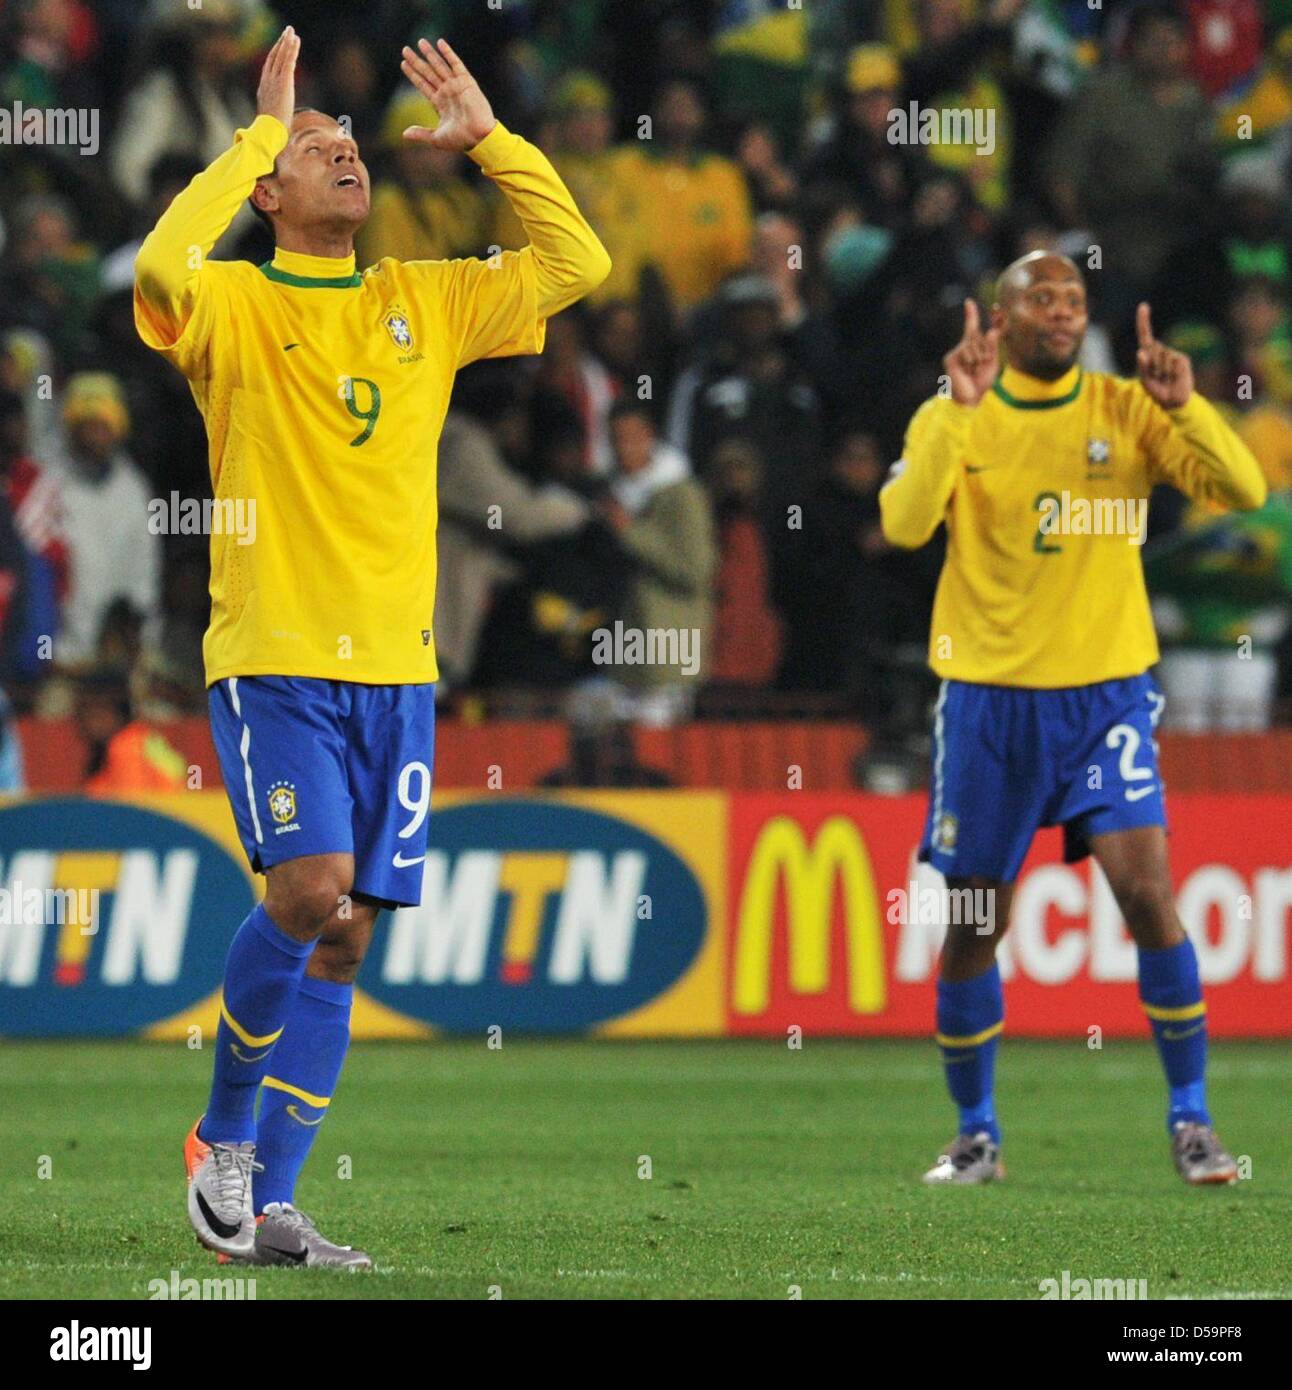 Luis Fabiano (L) and Maicon of Brazil gestures during the 2010 FIFA World Cup Round of Sixteen match between Brazil and Chile at the Ellis Park Stadium in Johannesburg, South Africa 28 June 2010. Photo: Bernd Weissbrod dpa - Please refer to http://dpaq.de/FIFA-WM2010-TC Stock Photo